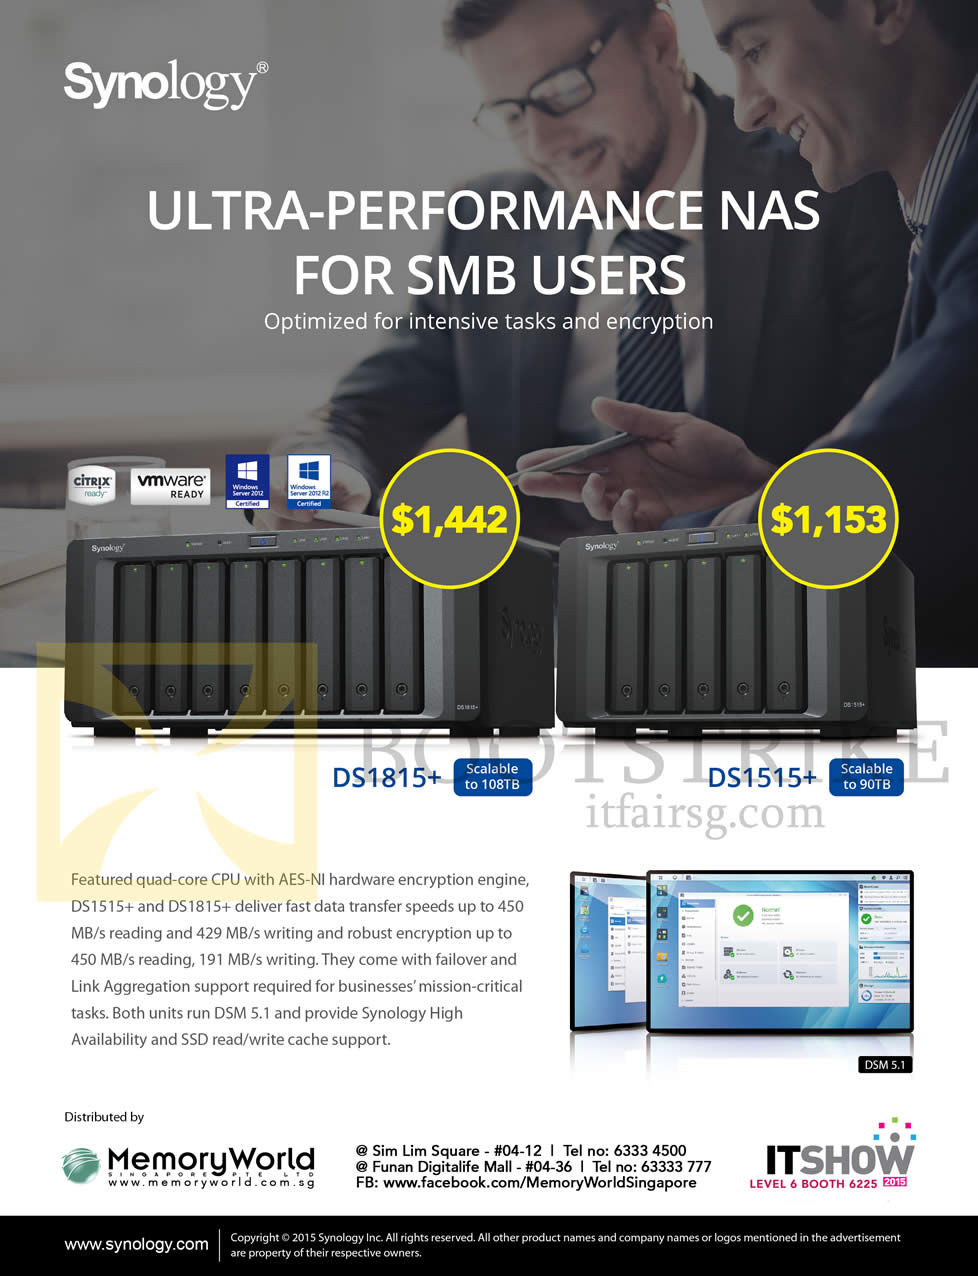 IT SHOW 2015 price list image brochure of Memory World Synology DiskStation NAS DS1815Plus, DS1515Plus